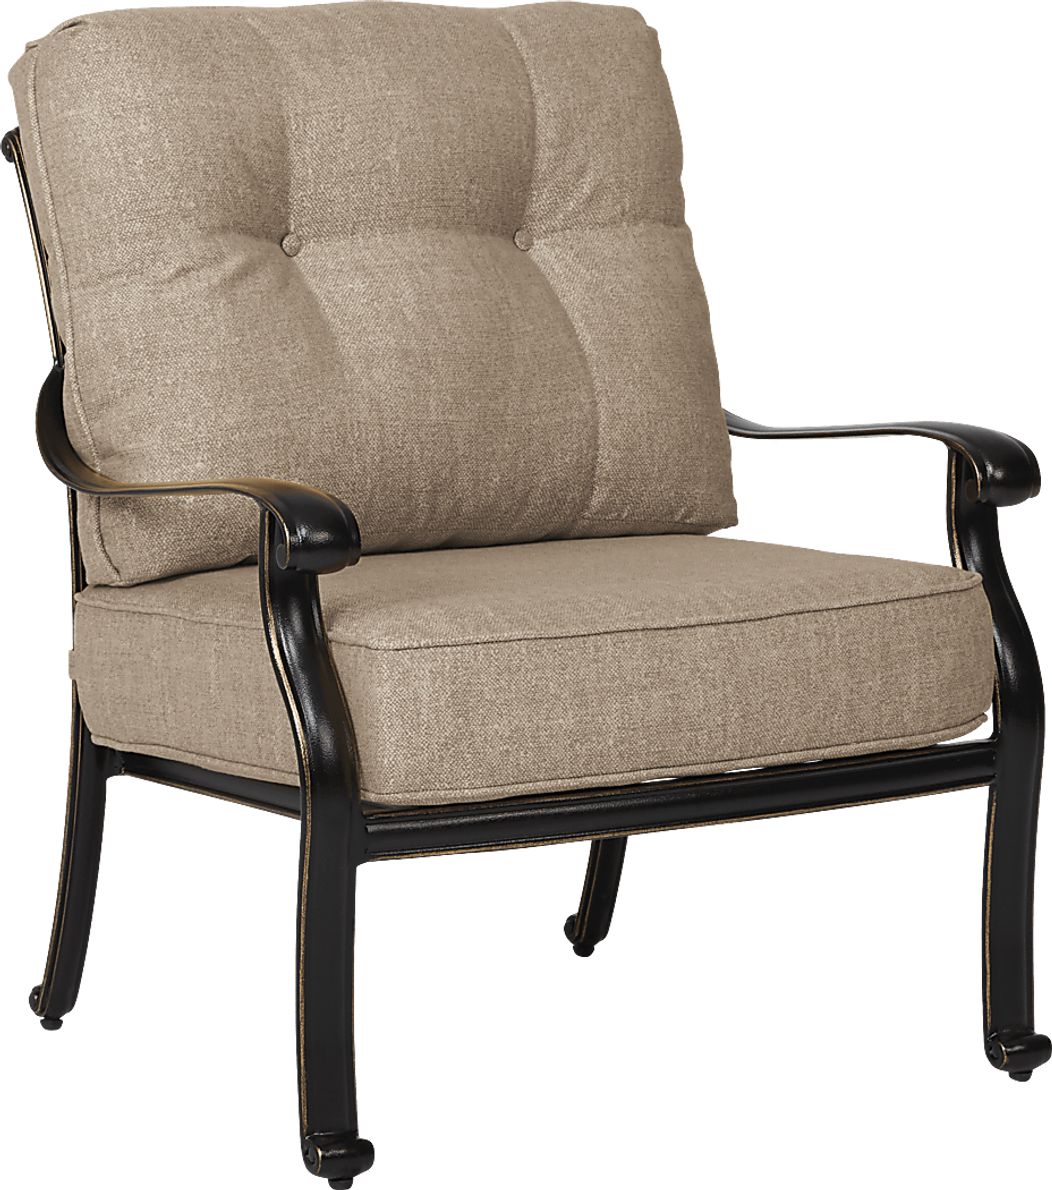 Cindy Crawford Home Lake Como Antique Bronze Outdoor Club Chair With Malt Cushions